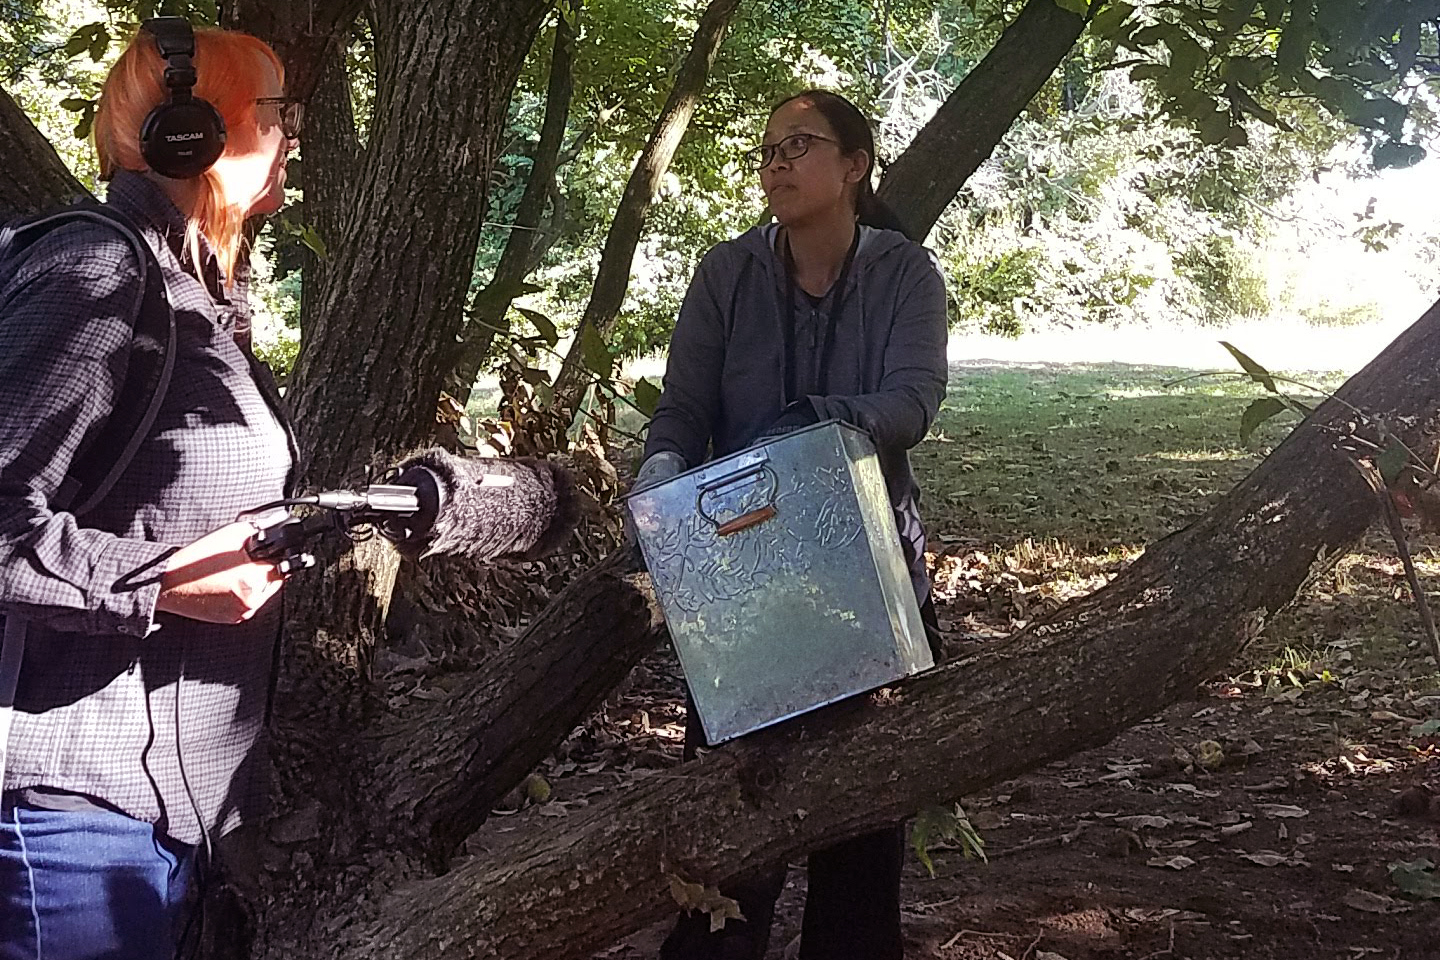 Linlin and Kayte standing under a tree, Kayte has microphone and headphones, Linlin has a metal box resting on large tree branch